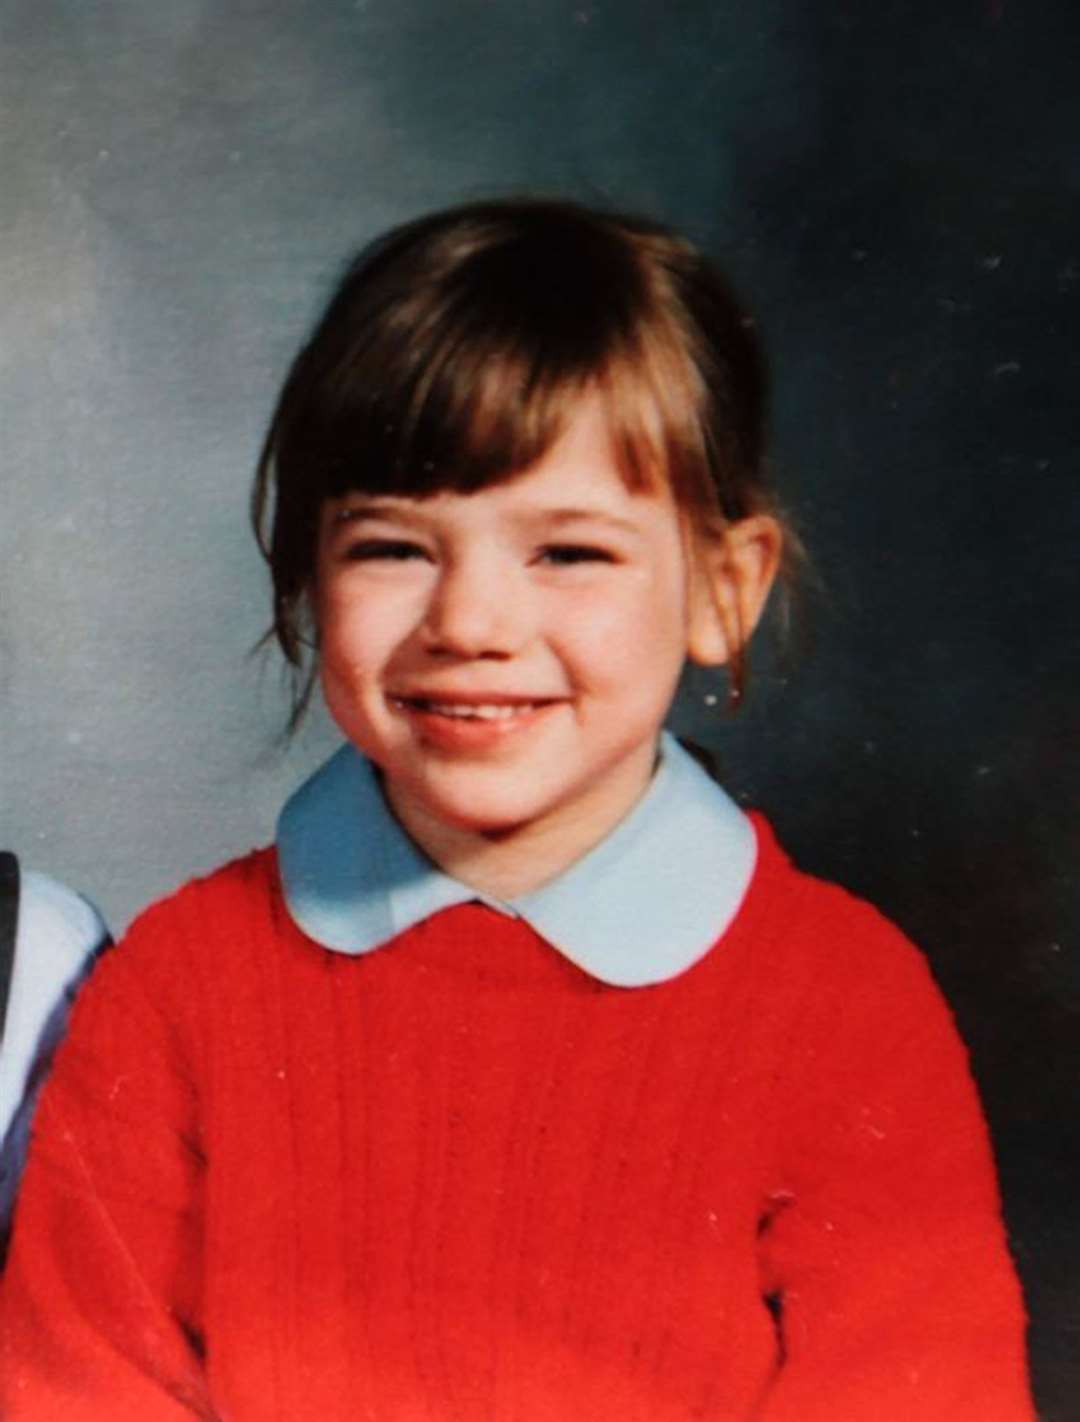 David Thomas Boyd has been charged with the murder of schoolgirl Nikki Allan in October 1992 (Northumbria Police/PA)